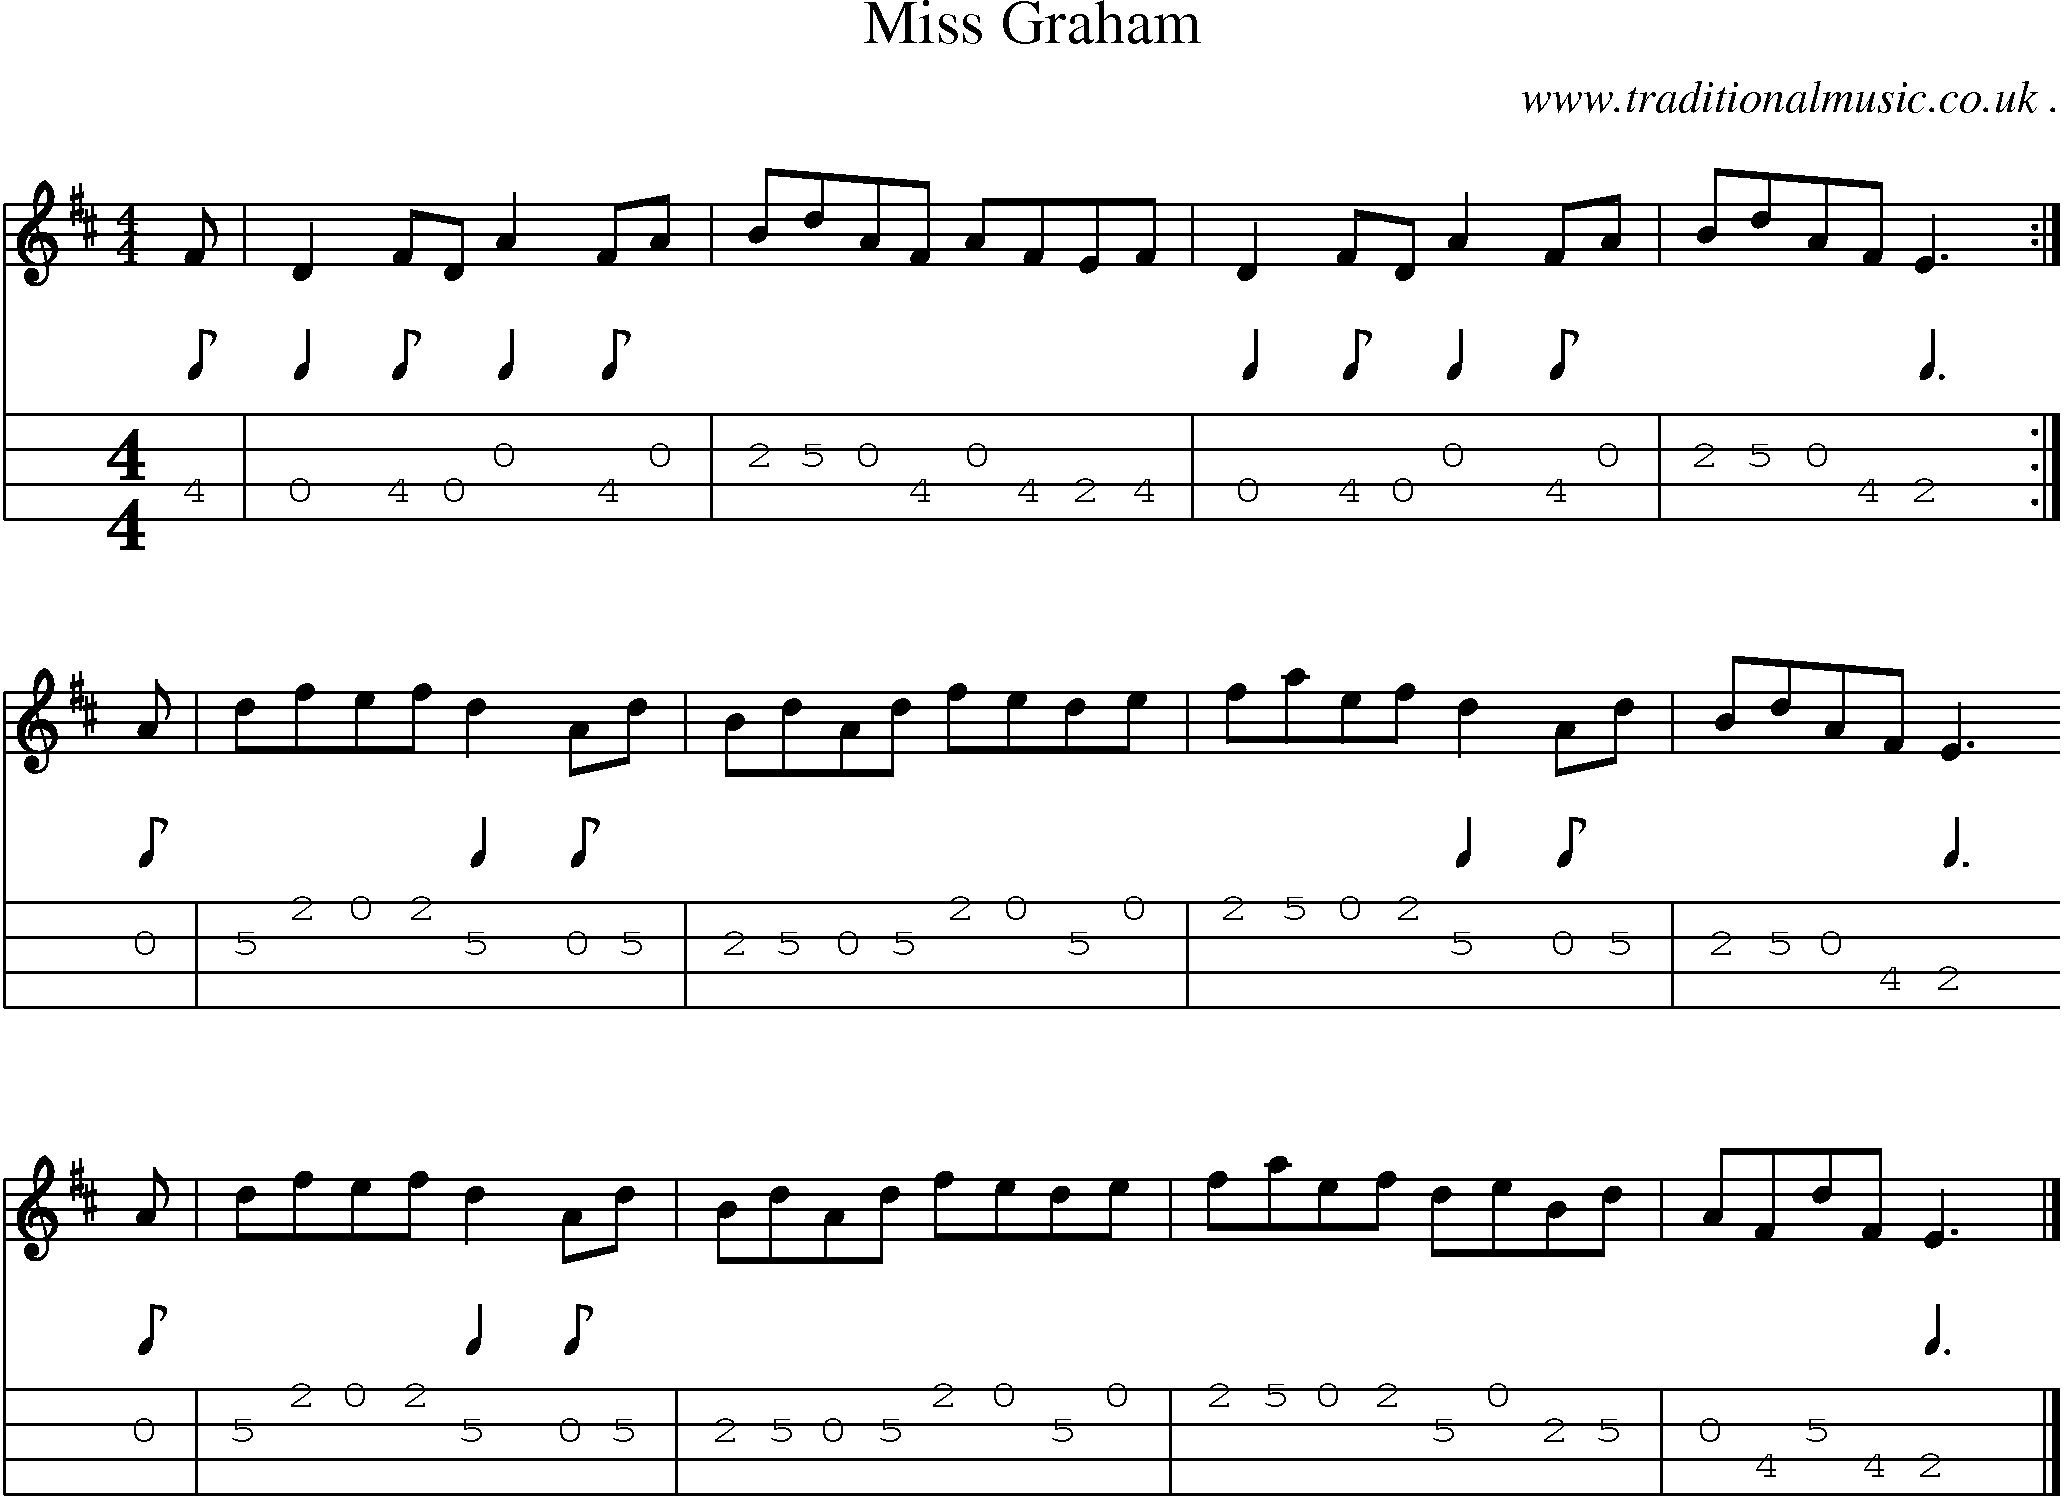 Sheet-music  score, Chords and Mandolin Tabs for Miss Graham